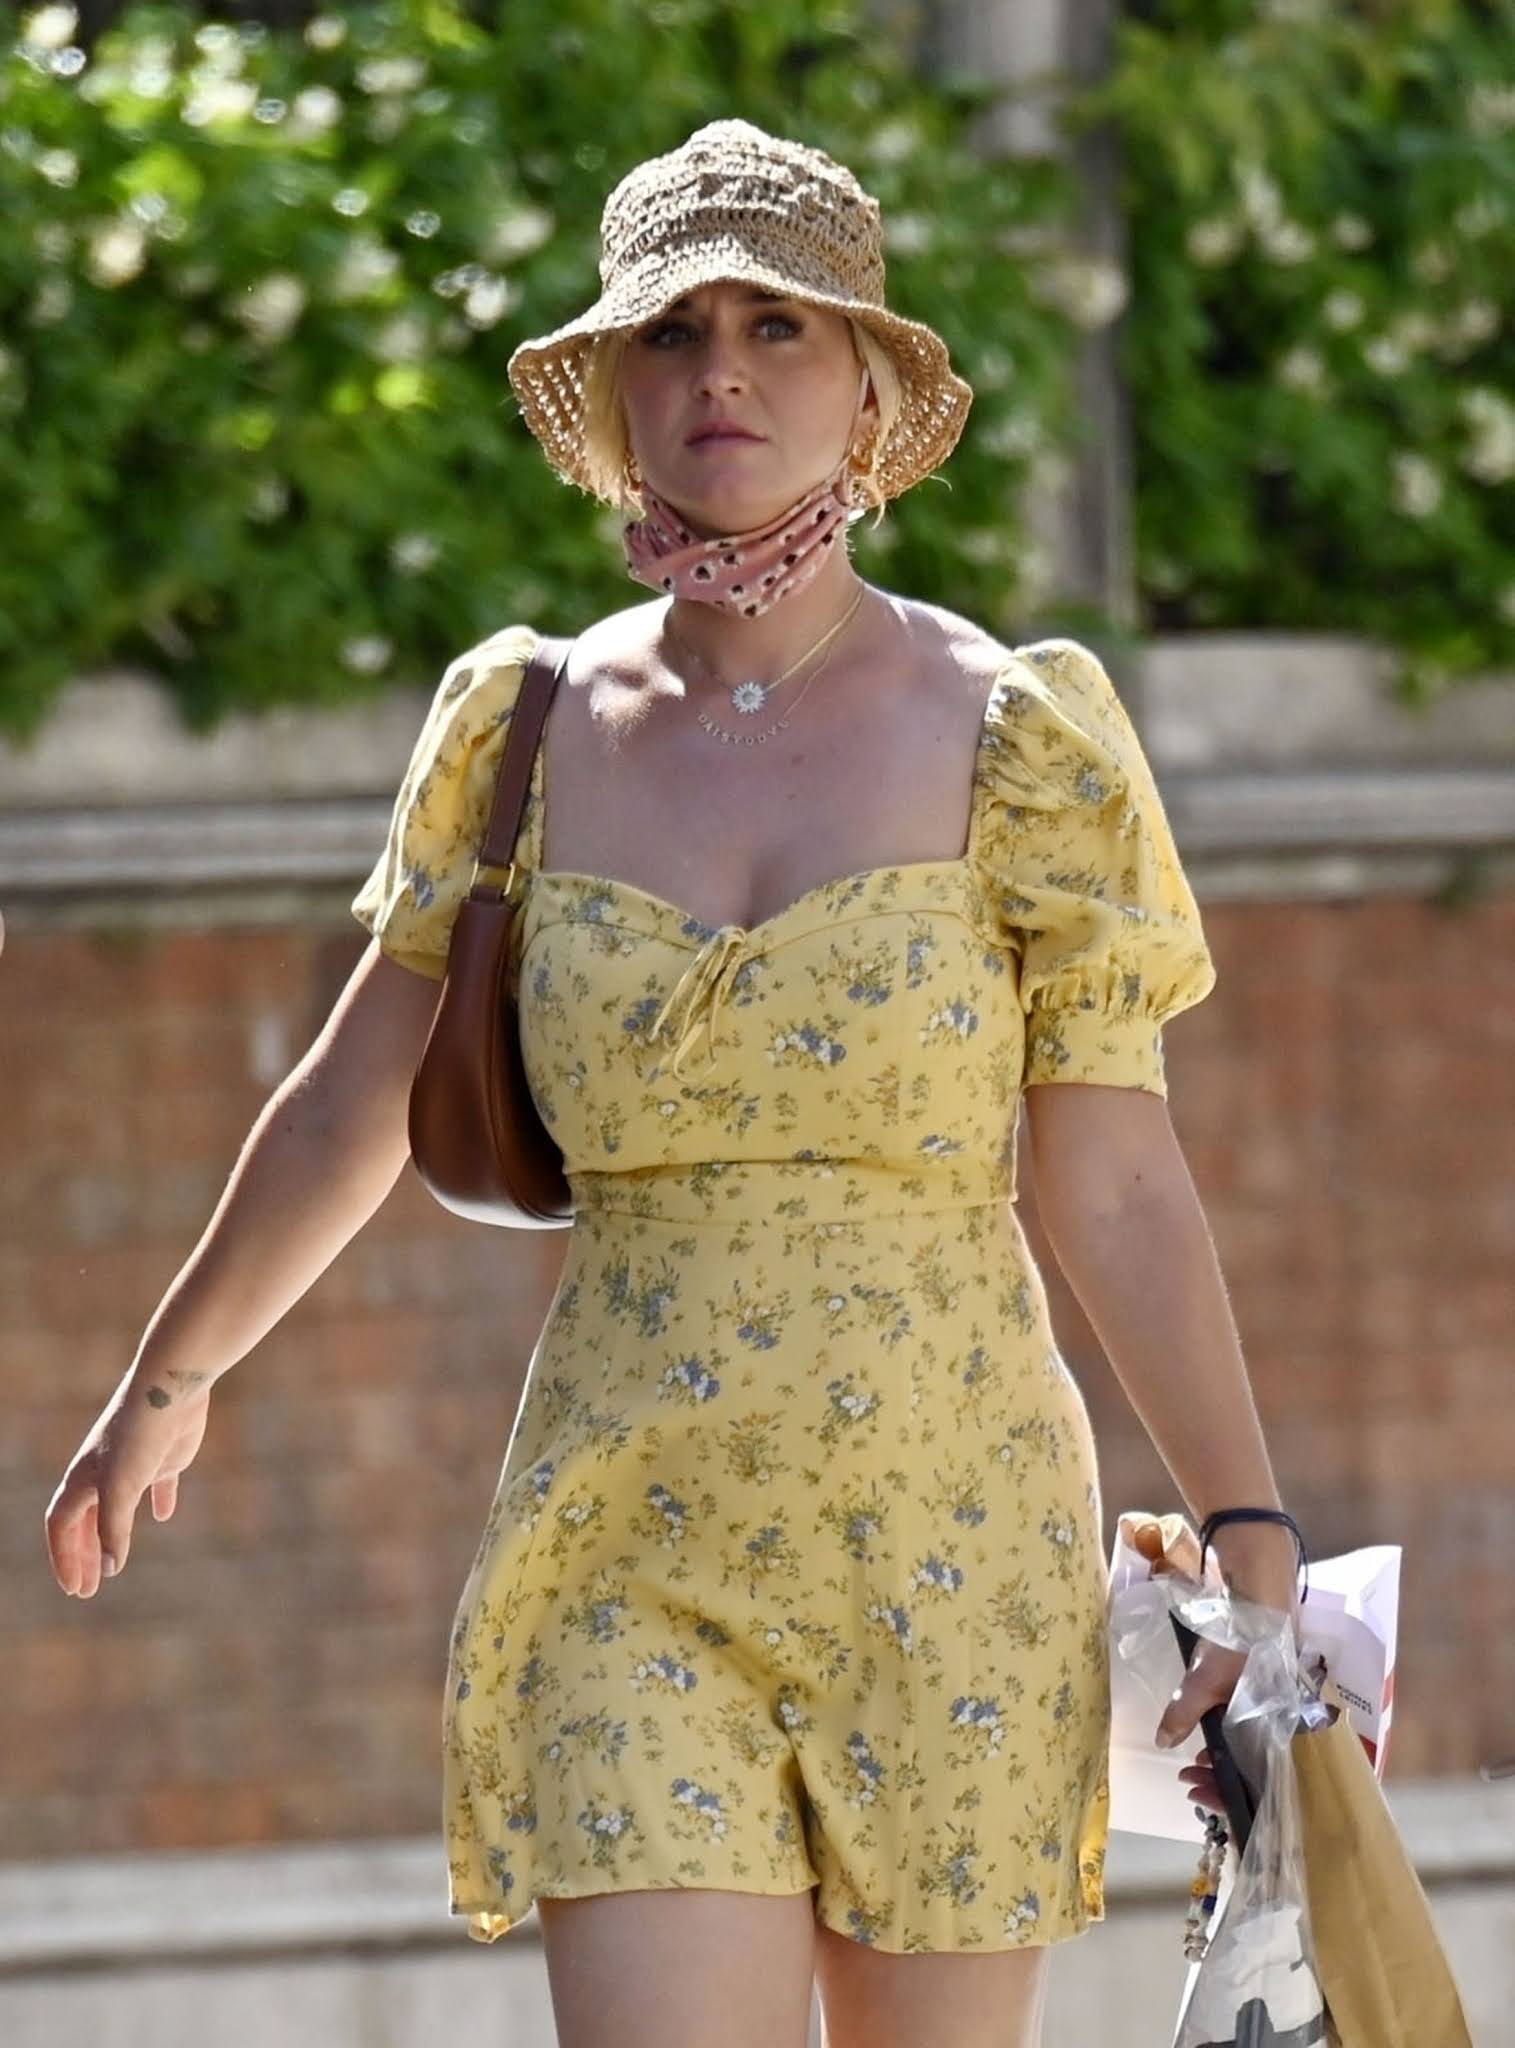 Katy Perry suffers a Marilyn Monroe moment while out and about in Venice.